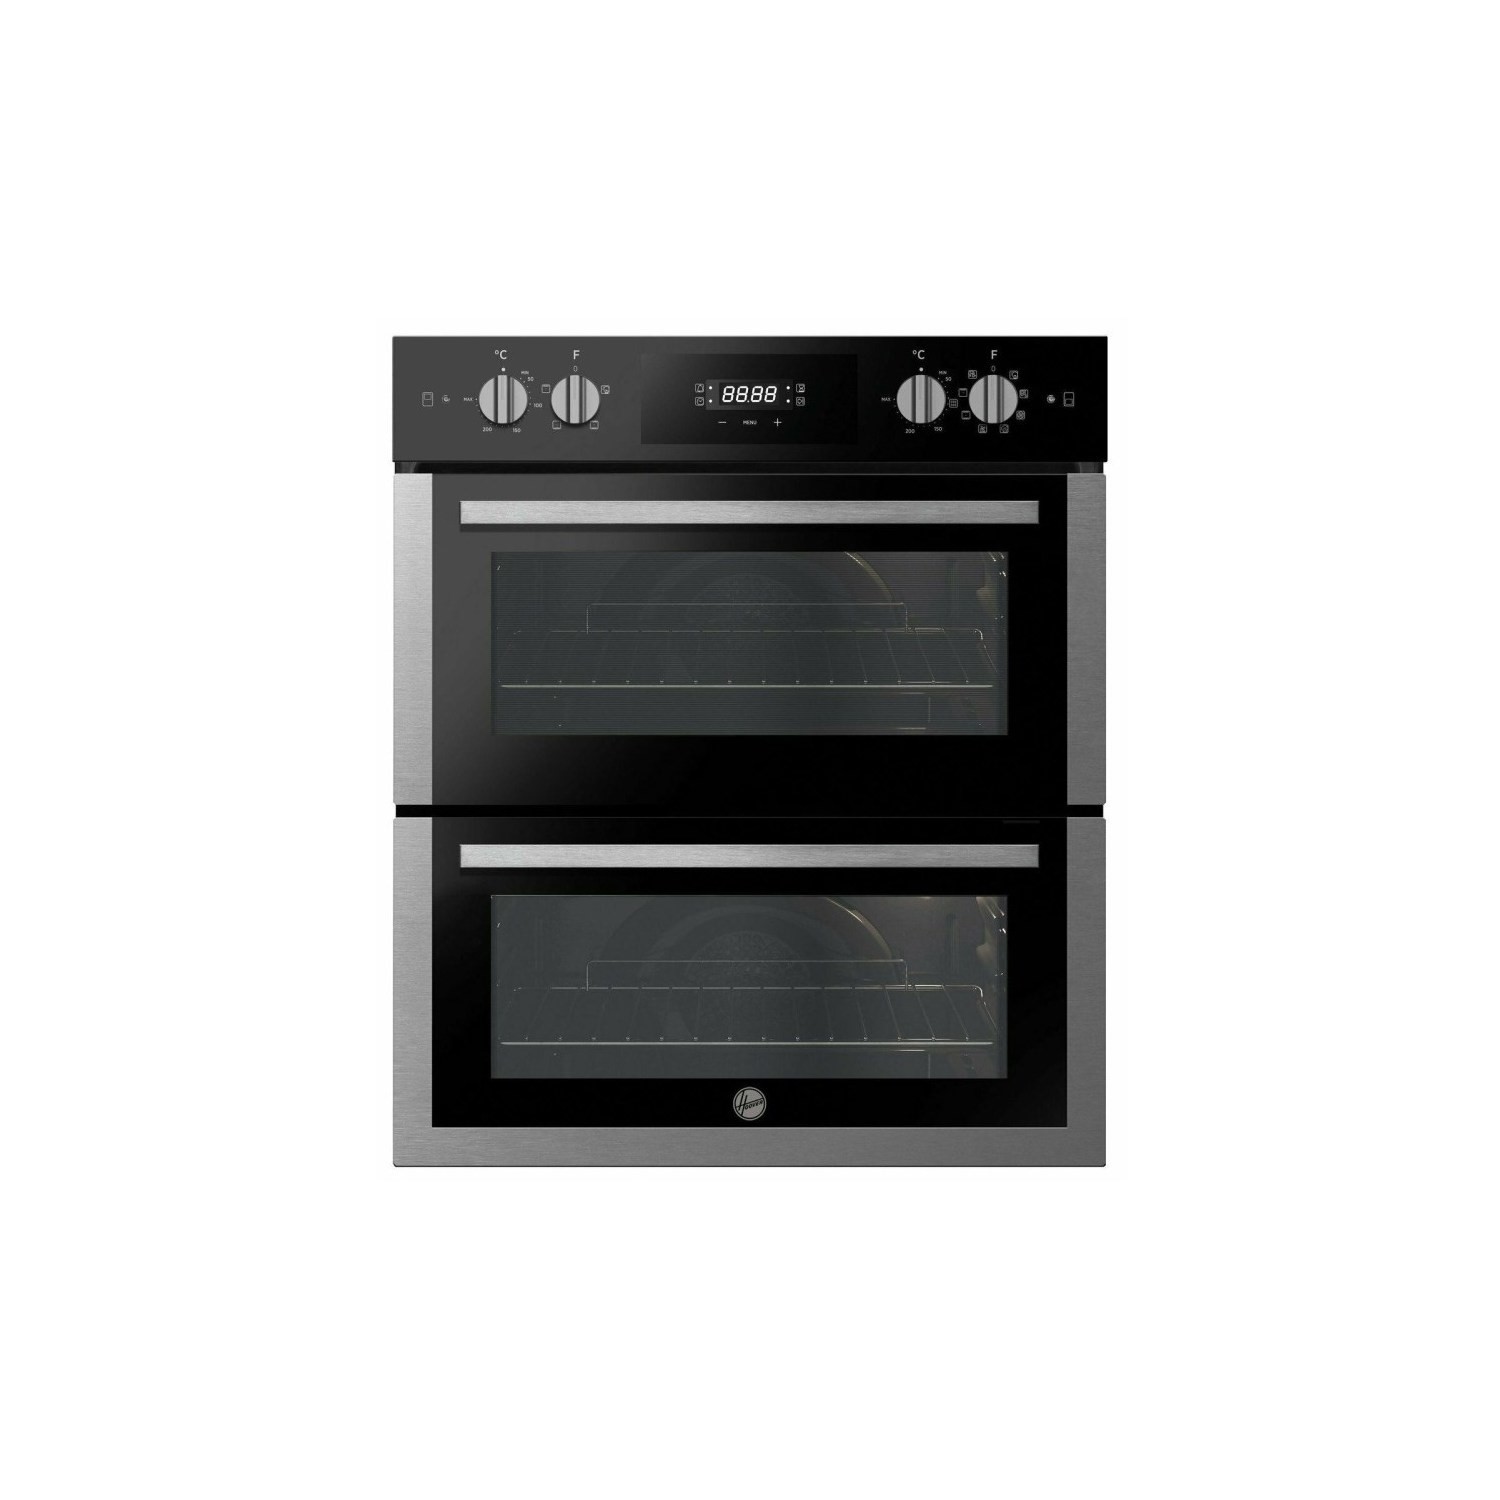 Refurbished Hoover H-Oven 300 HO9DC3UB308BI 60cm Double Built In Electric Oven